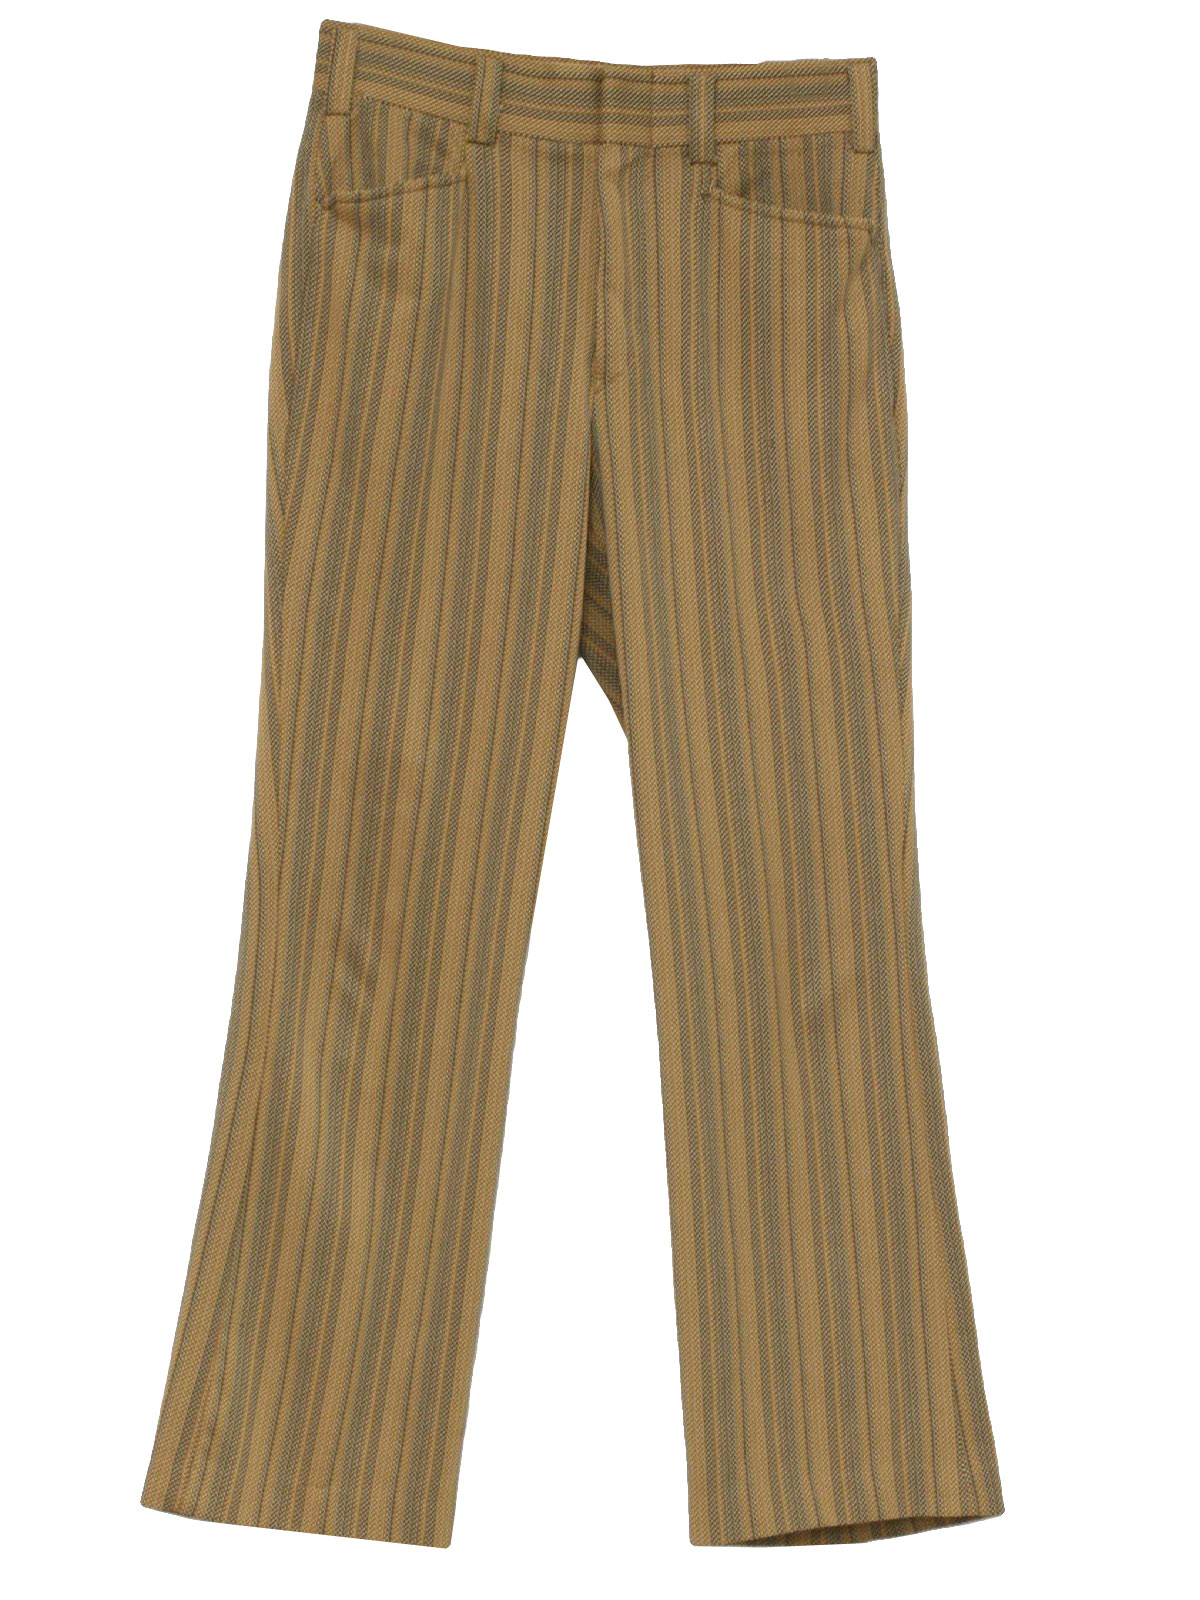 1970s Vintage Flared Pants / Flares: Early 70s -Sears Perma Prest- Mens ...